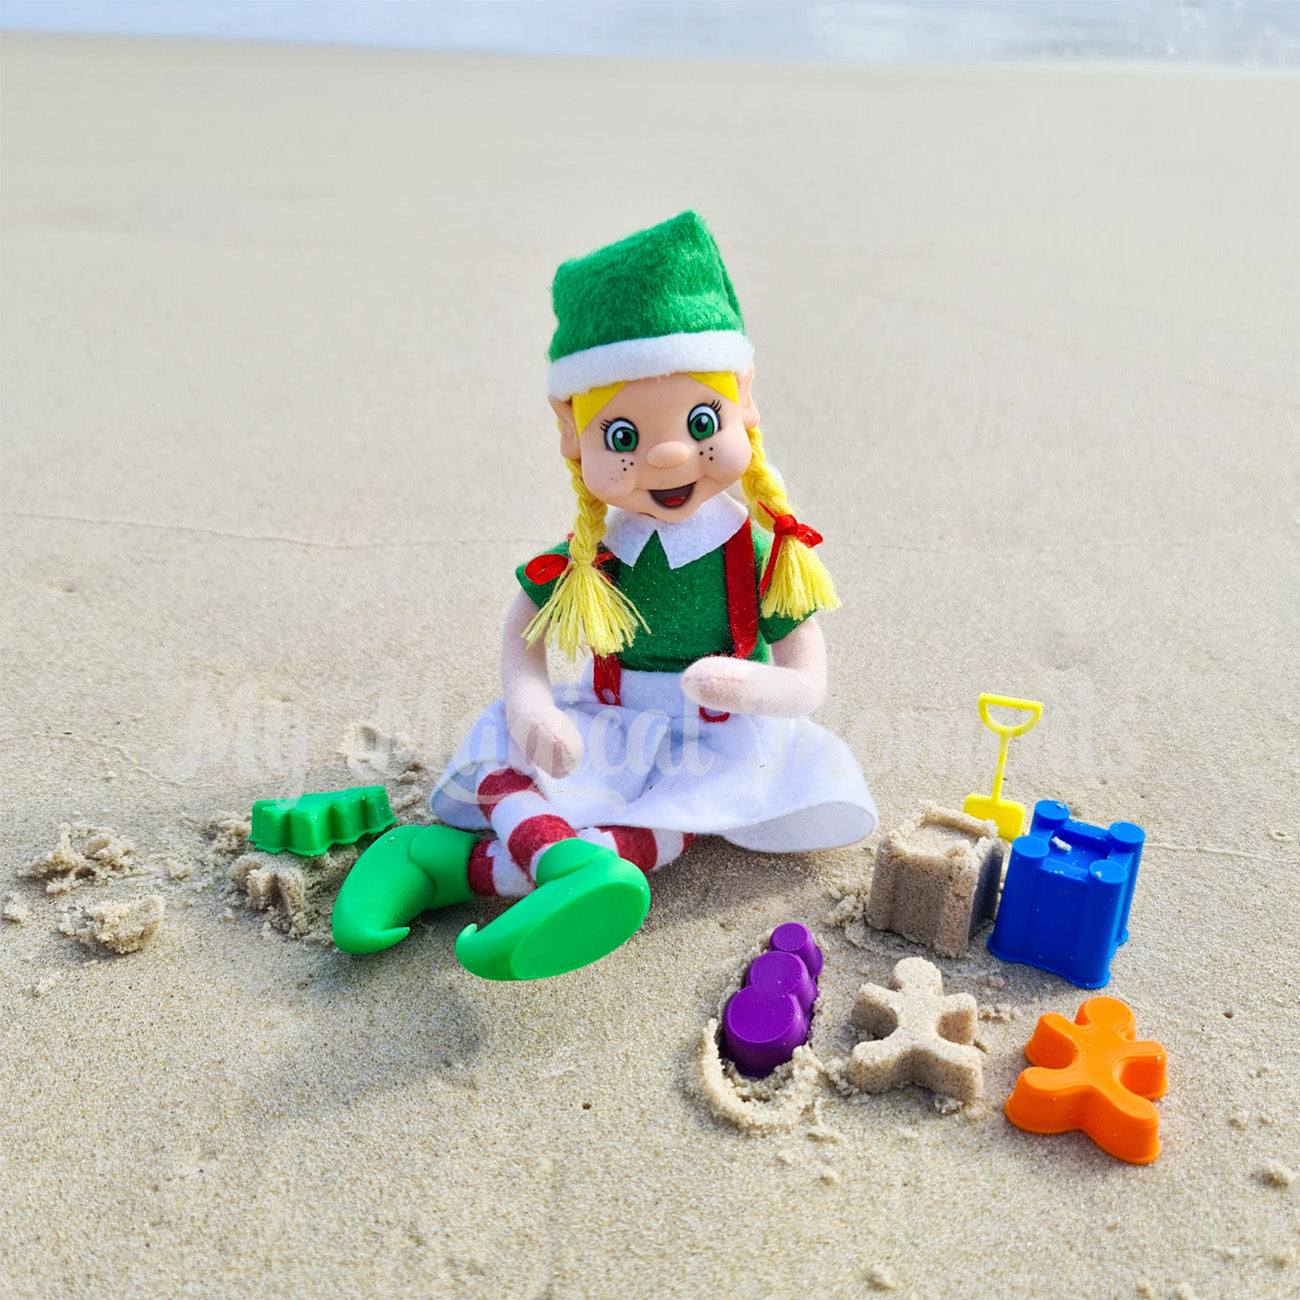 Elf playing at the beach making sand castles with miniature sand toys